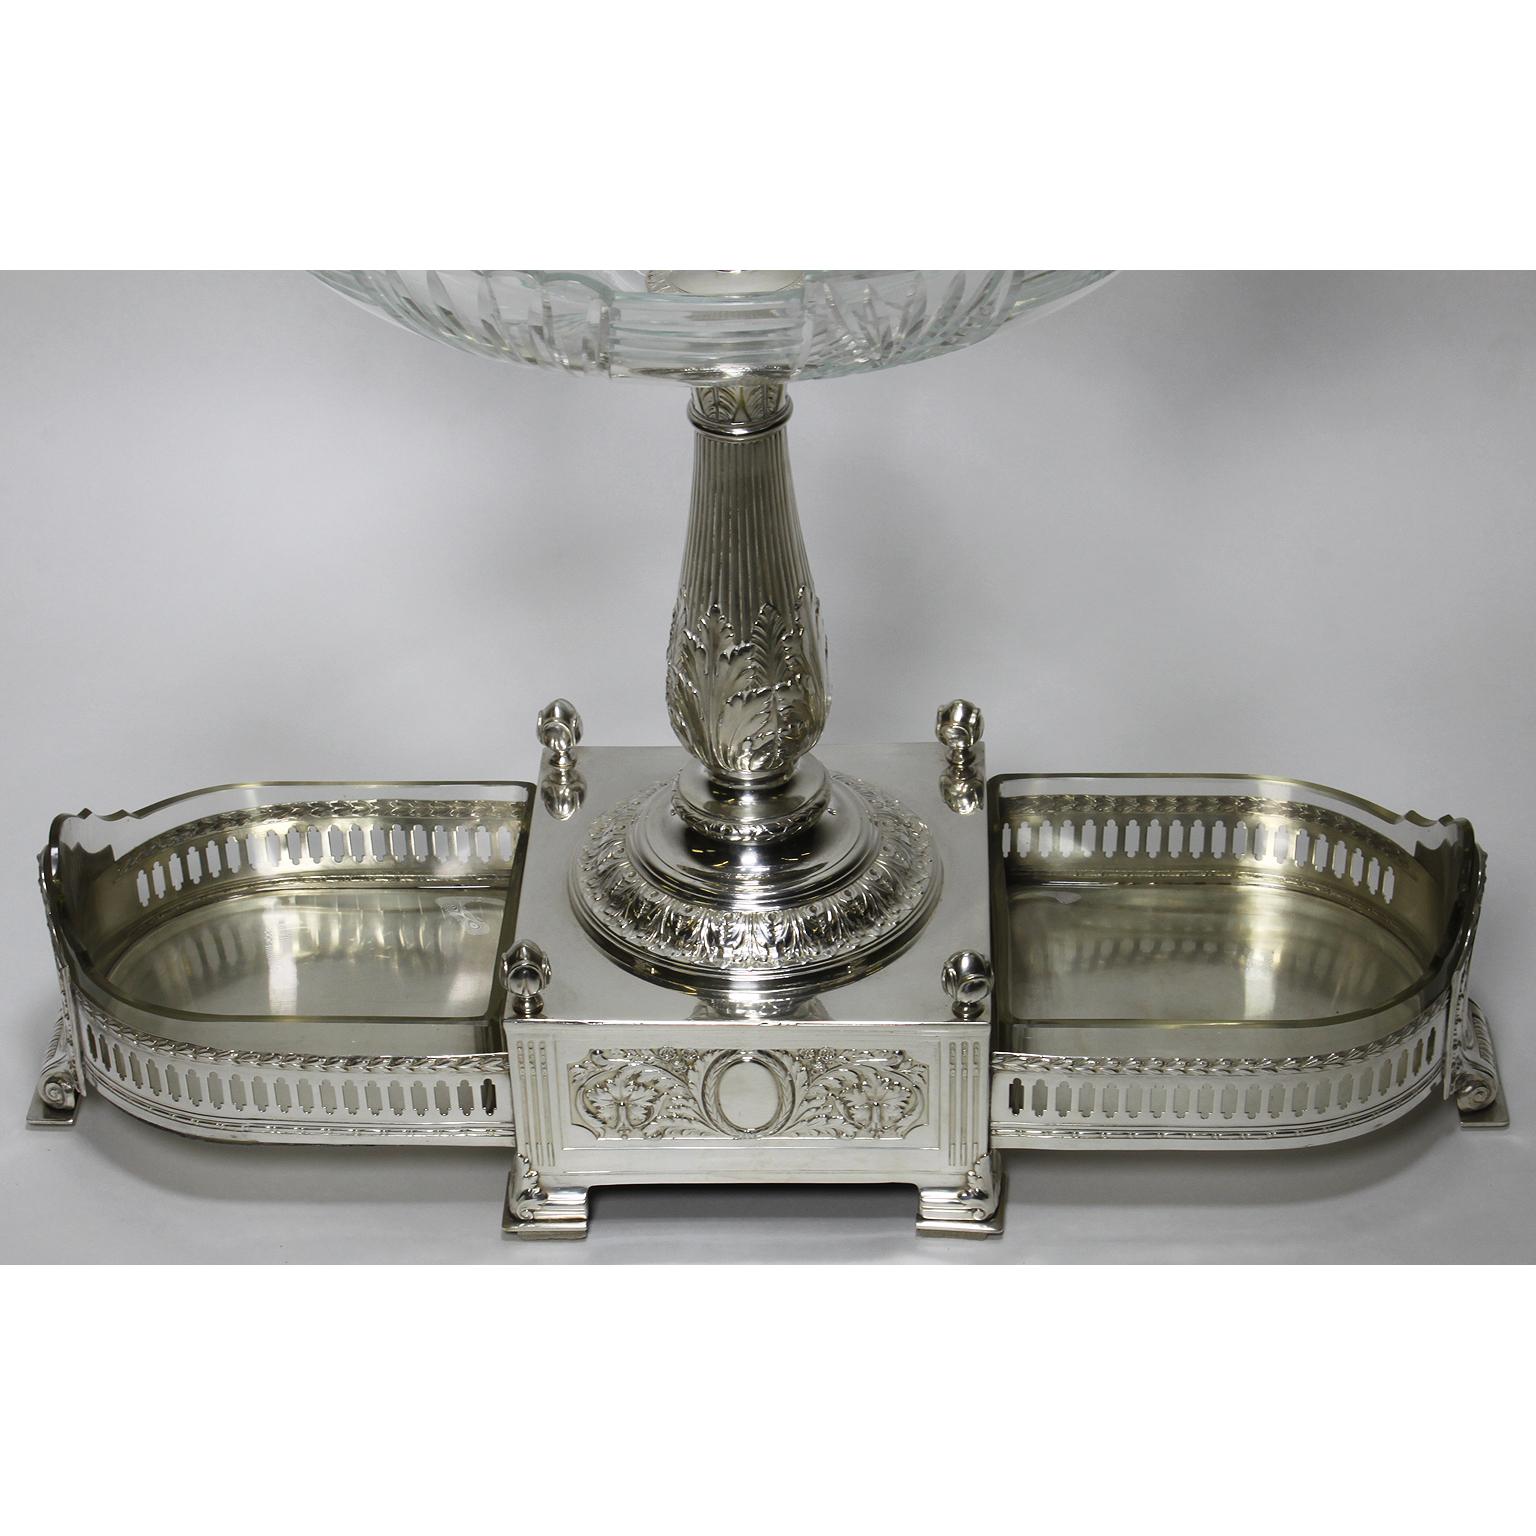 Unknown Manner of Christofle 19th-20th Century Silver-Plated & Crystal Fruit Centerpiece For Sale